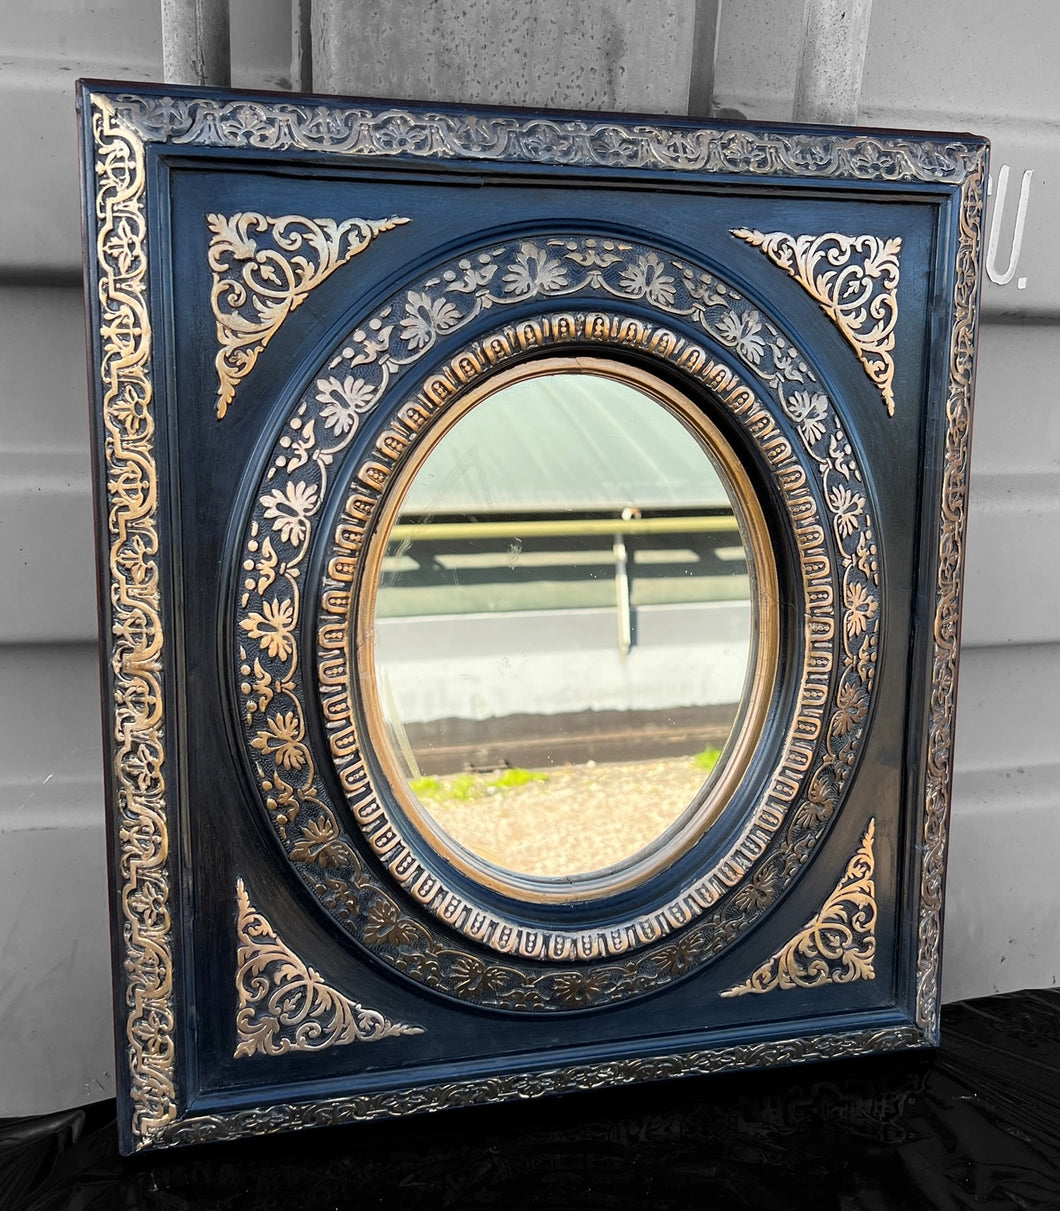 ANTIQUE 19TH CENTURY FRENCH ORNATE BLACK & GOLD WALL MIRROR, C1900